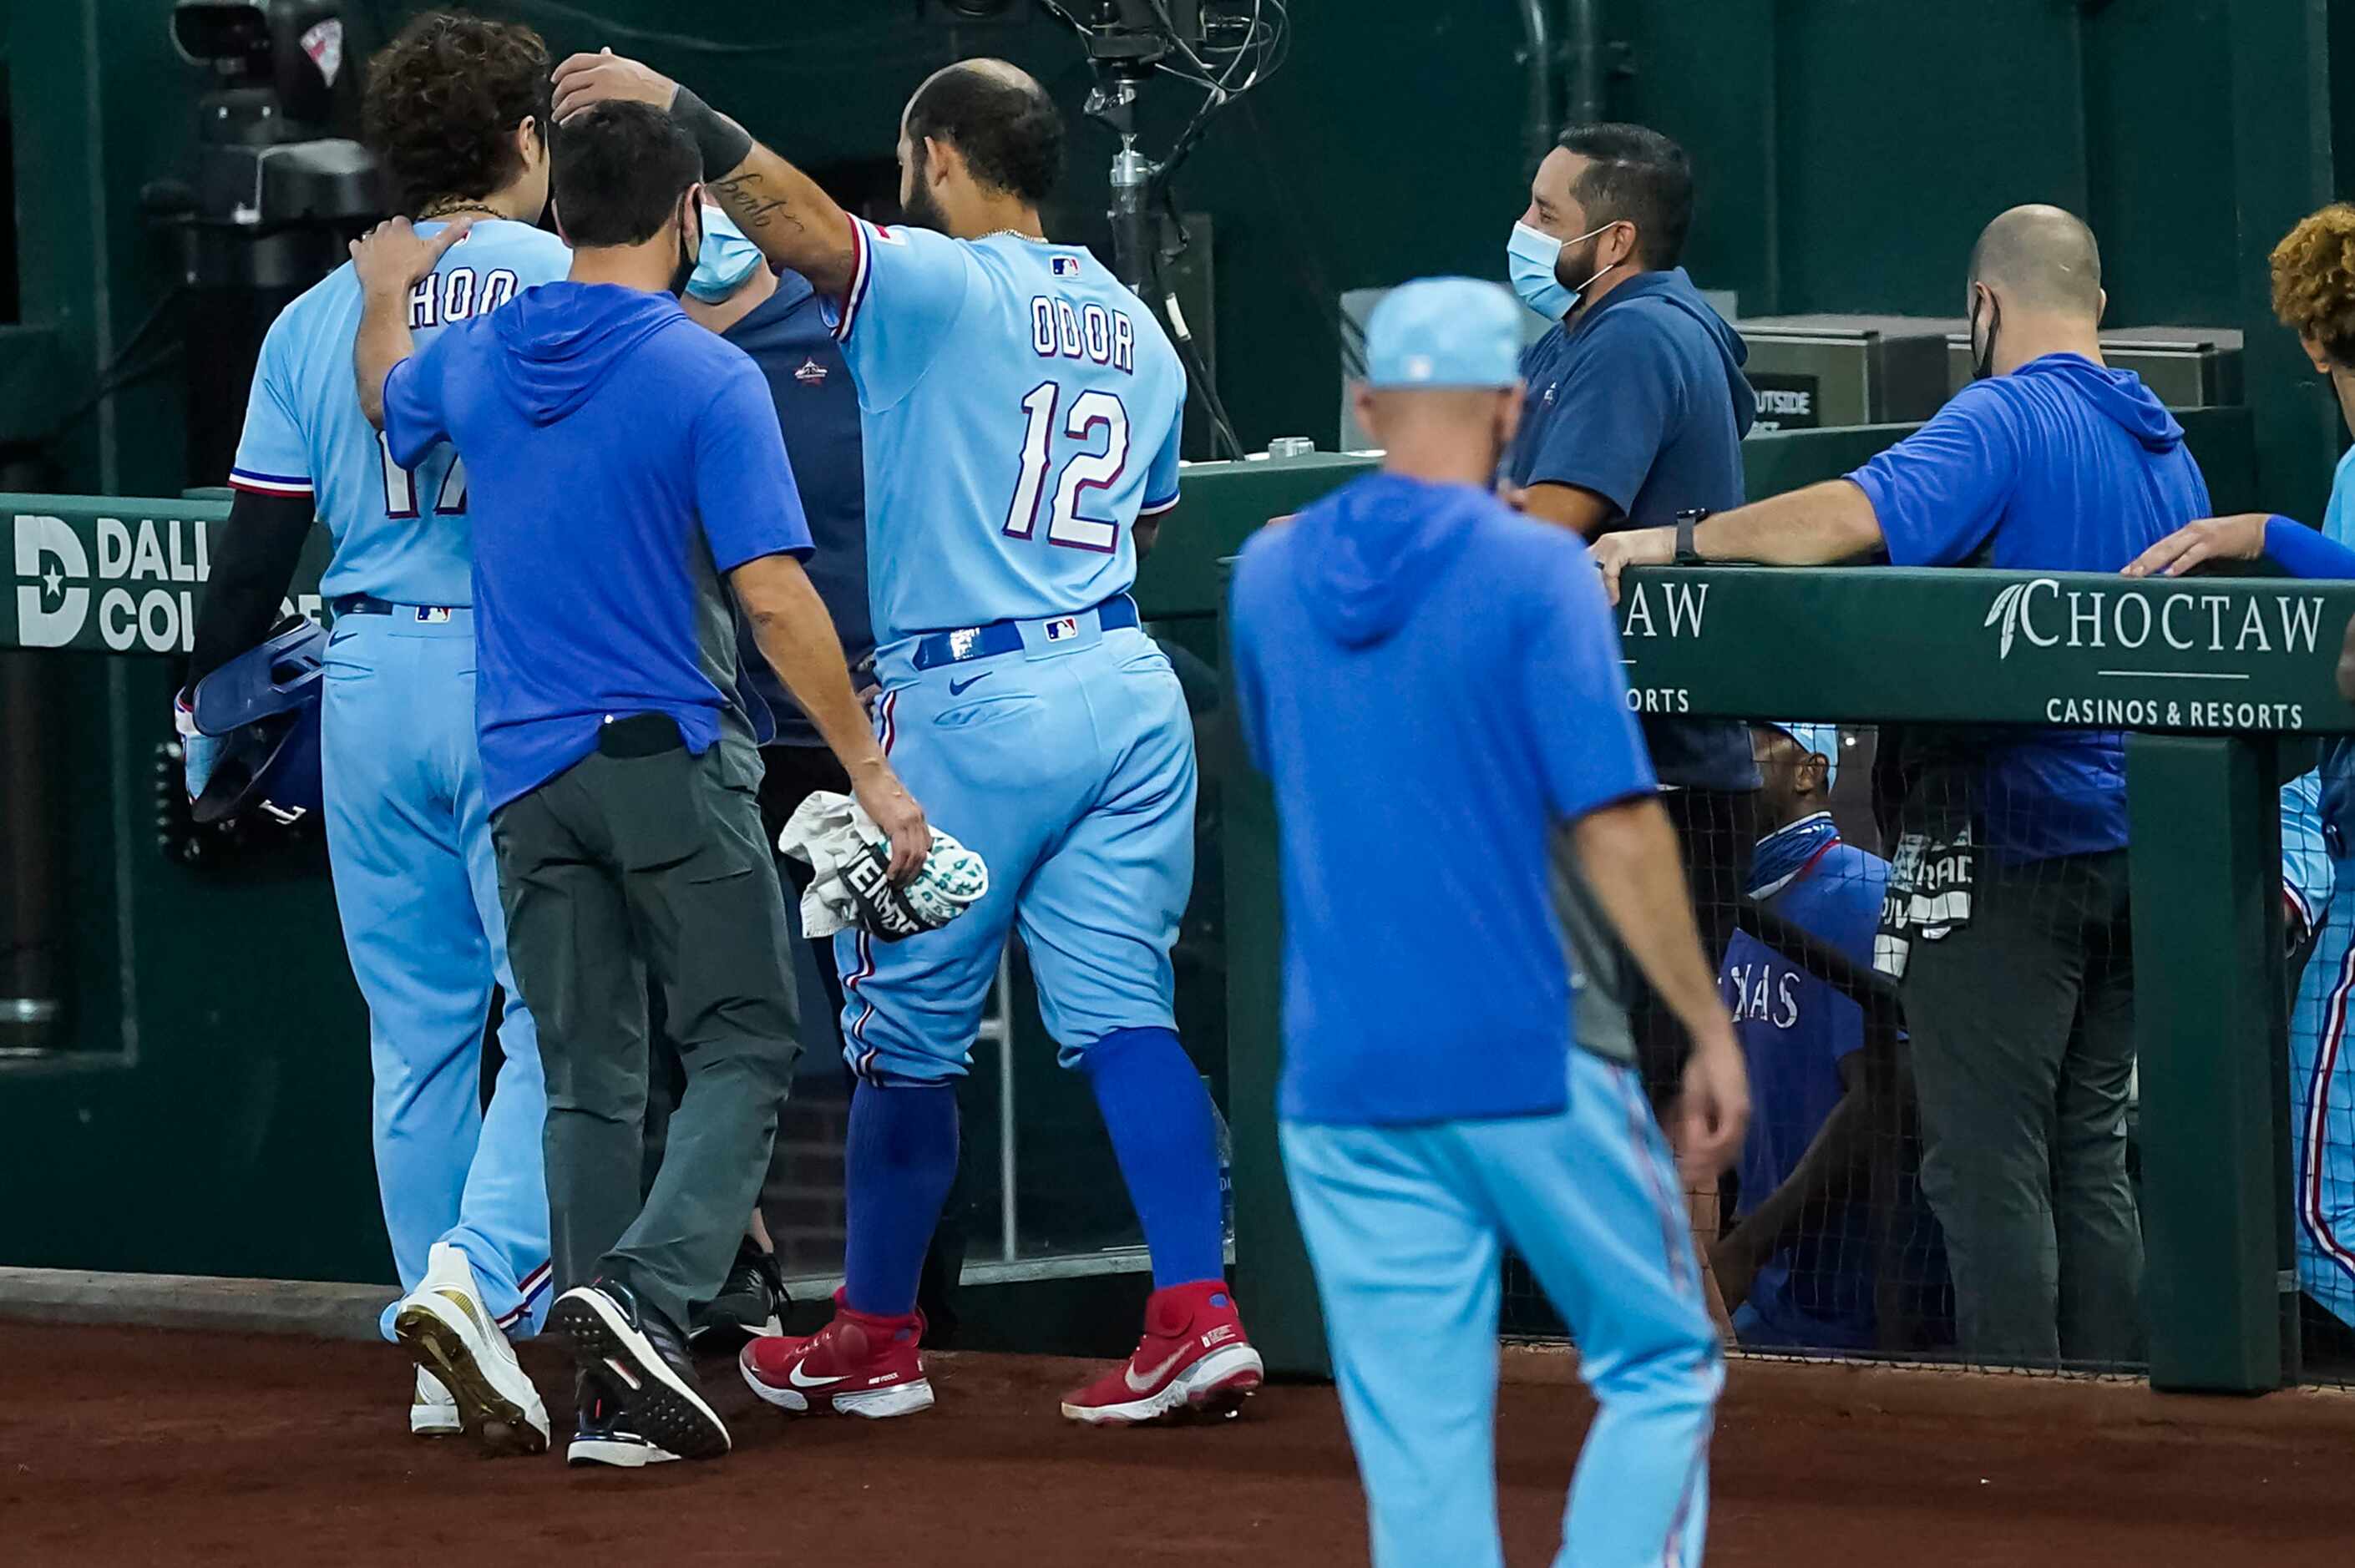 Texas Rangers designated hitter Shin-Soo Choo is welcomed back to the dugout with a hug from...